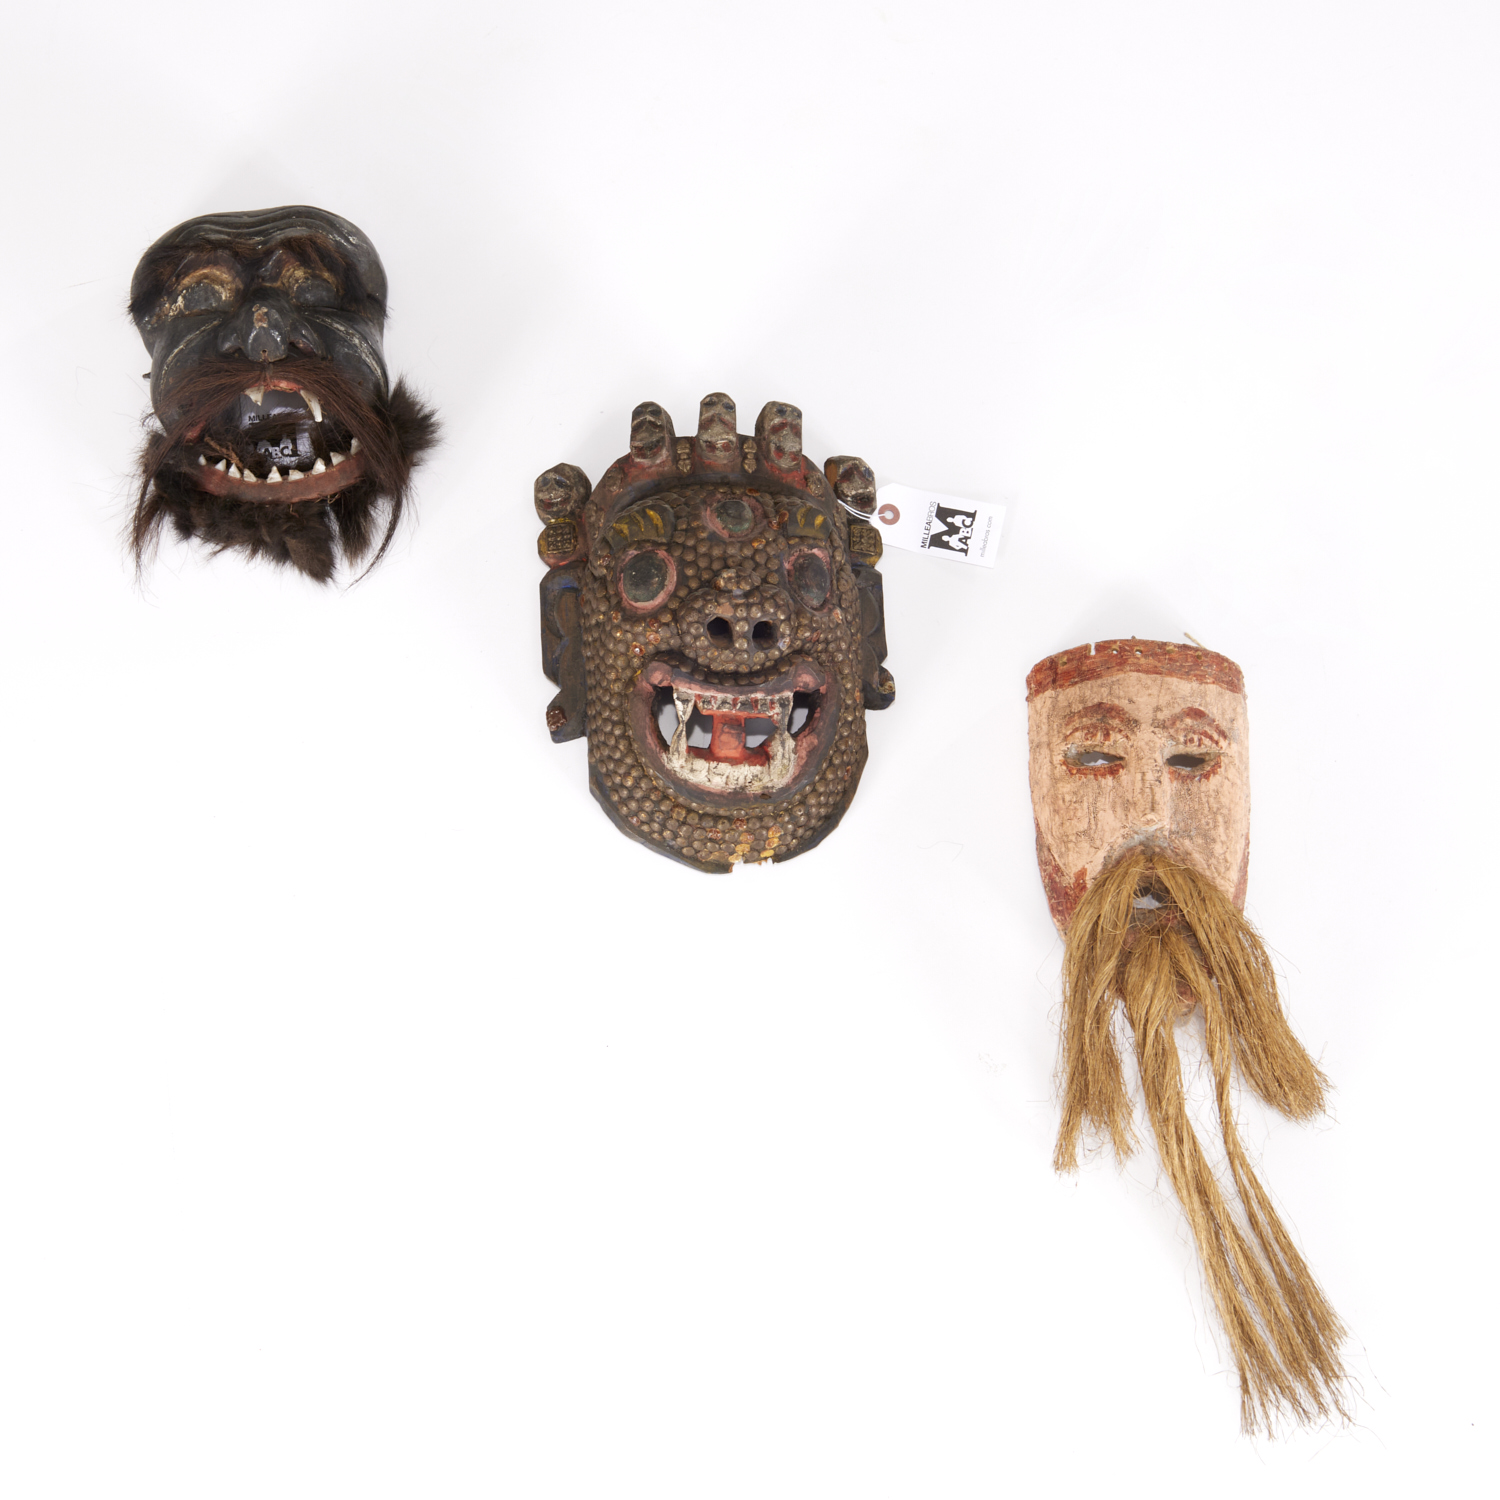 GROUP (3) INDONESIAN MASKS 20th